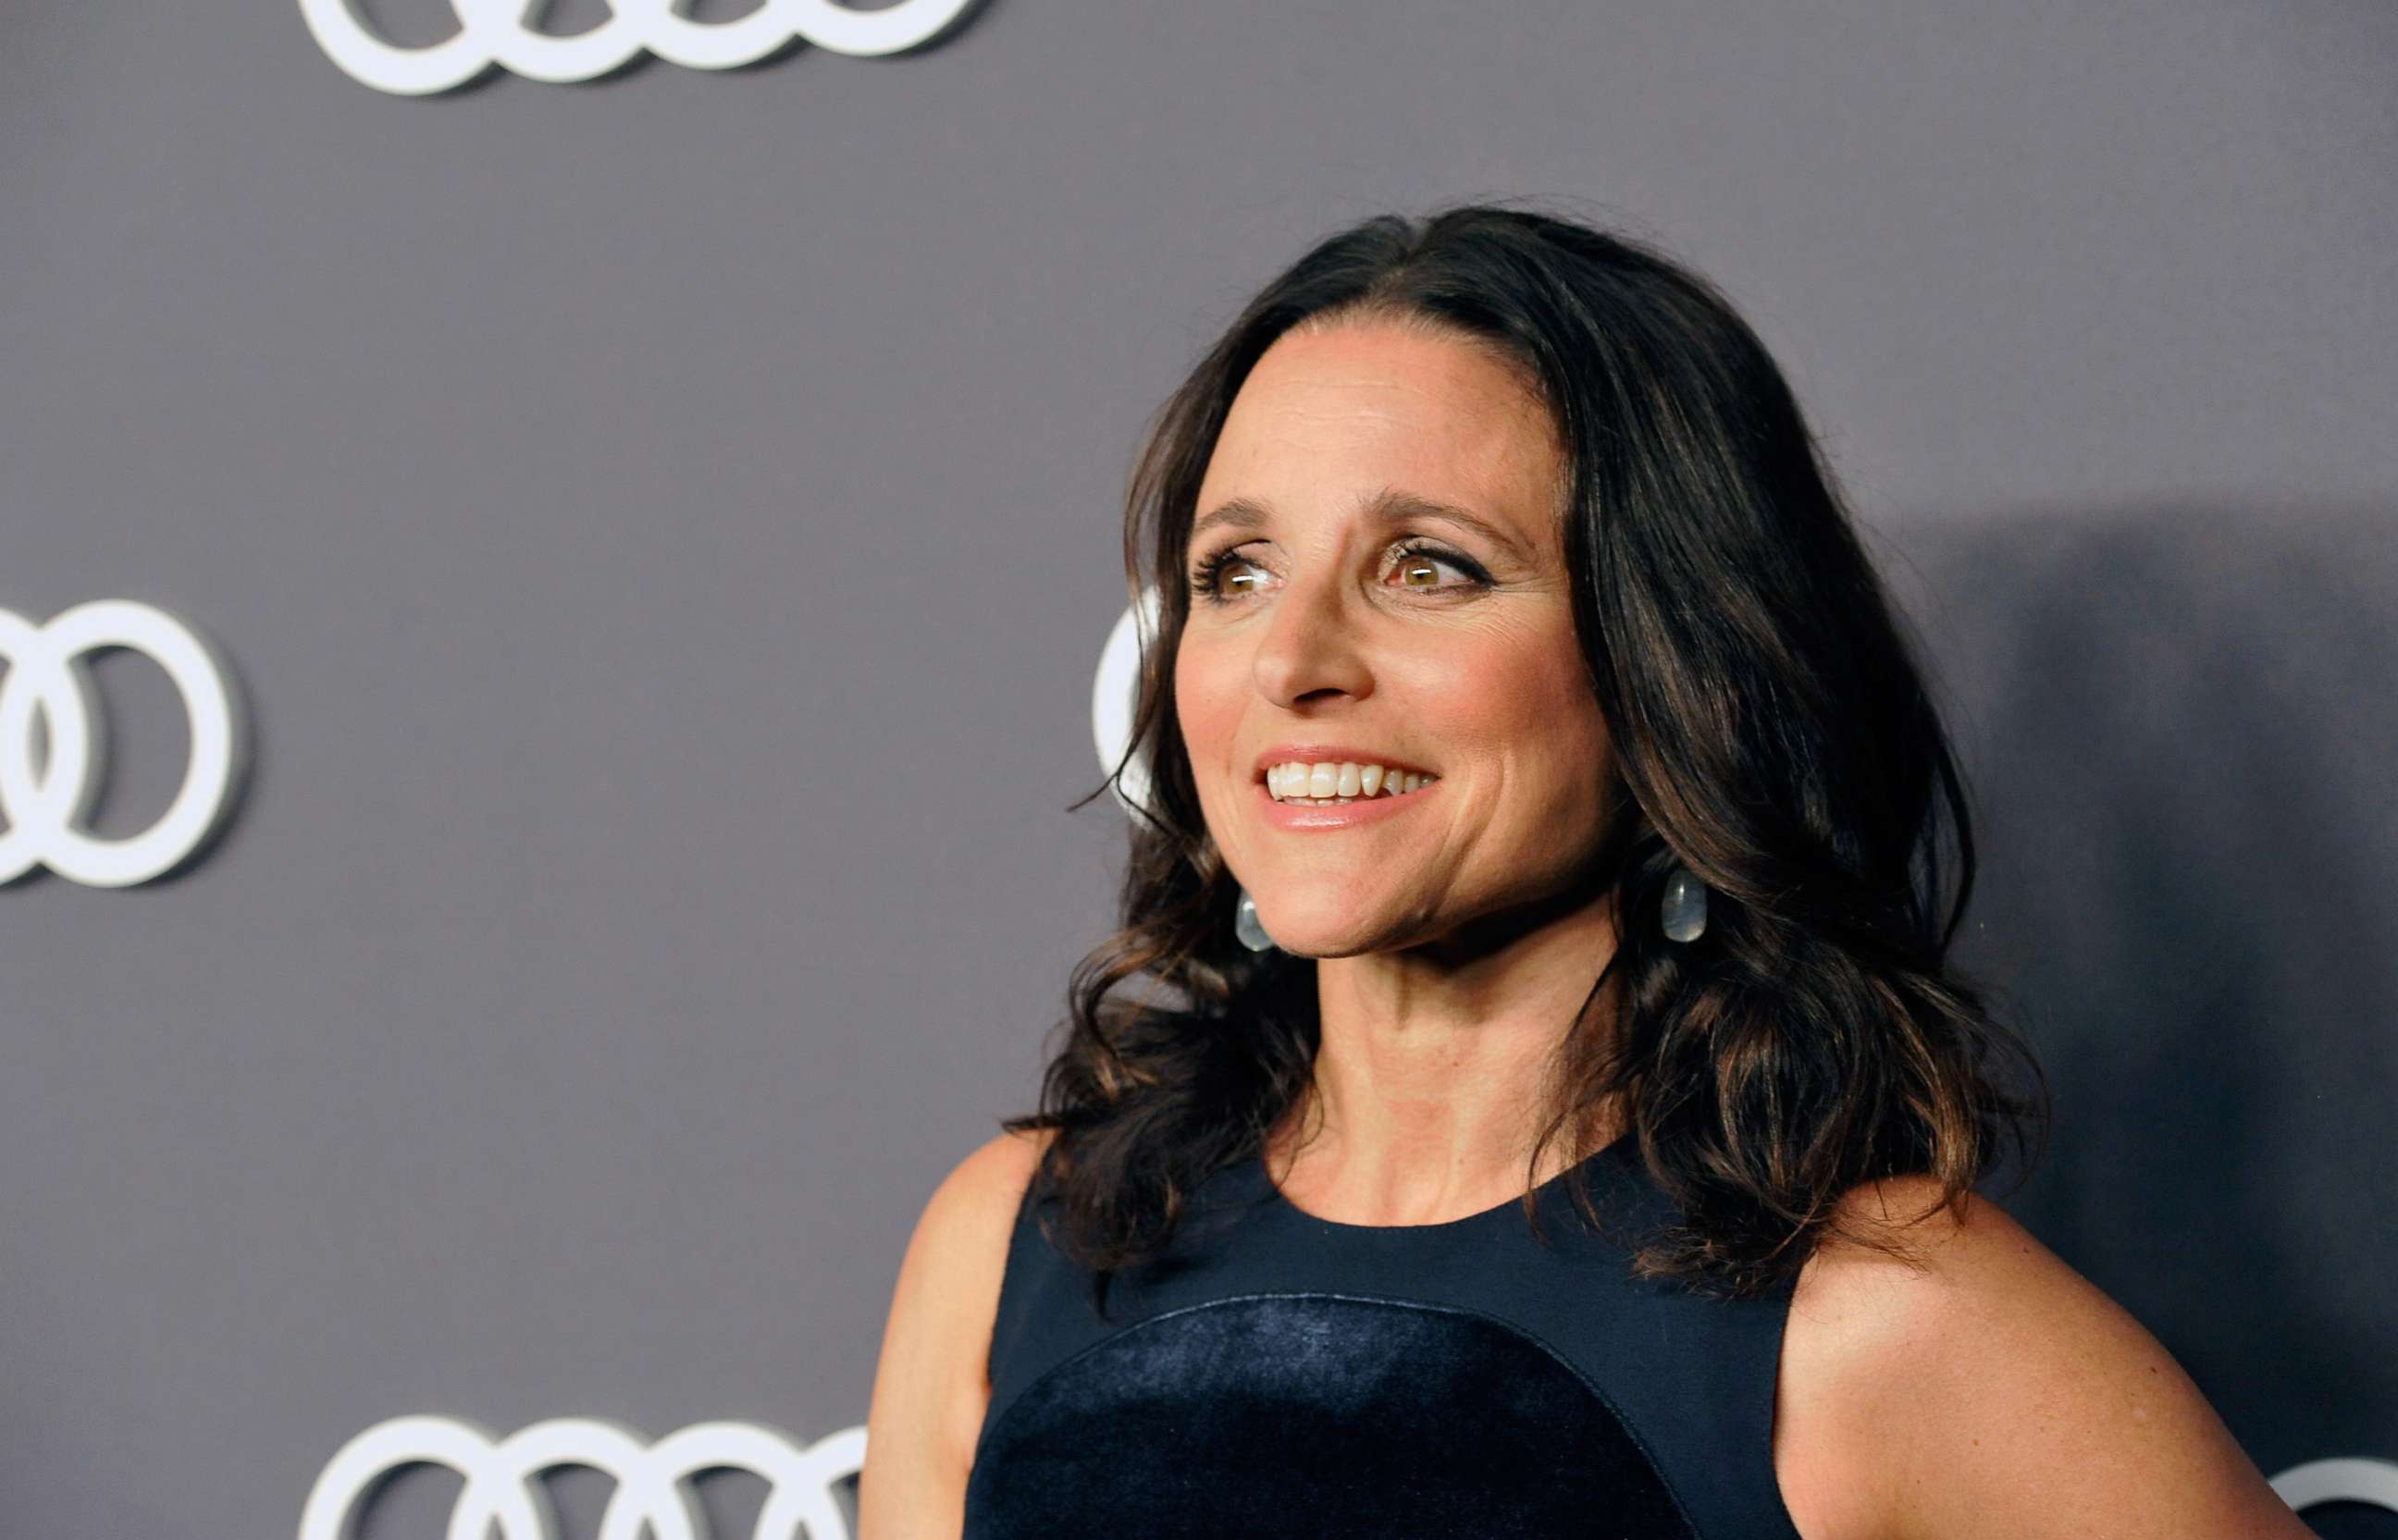 PHOTO: Julia Louis-Dreyfus attends an event at the Dream Hollywood, Sept.14, 2017 in Hollywood, Calif.